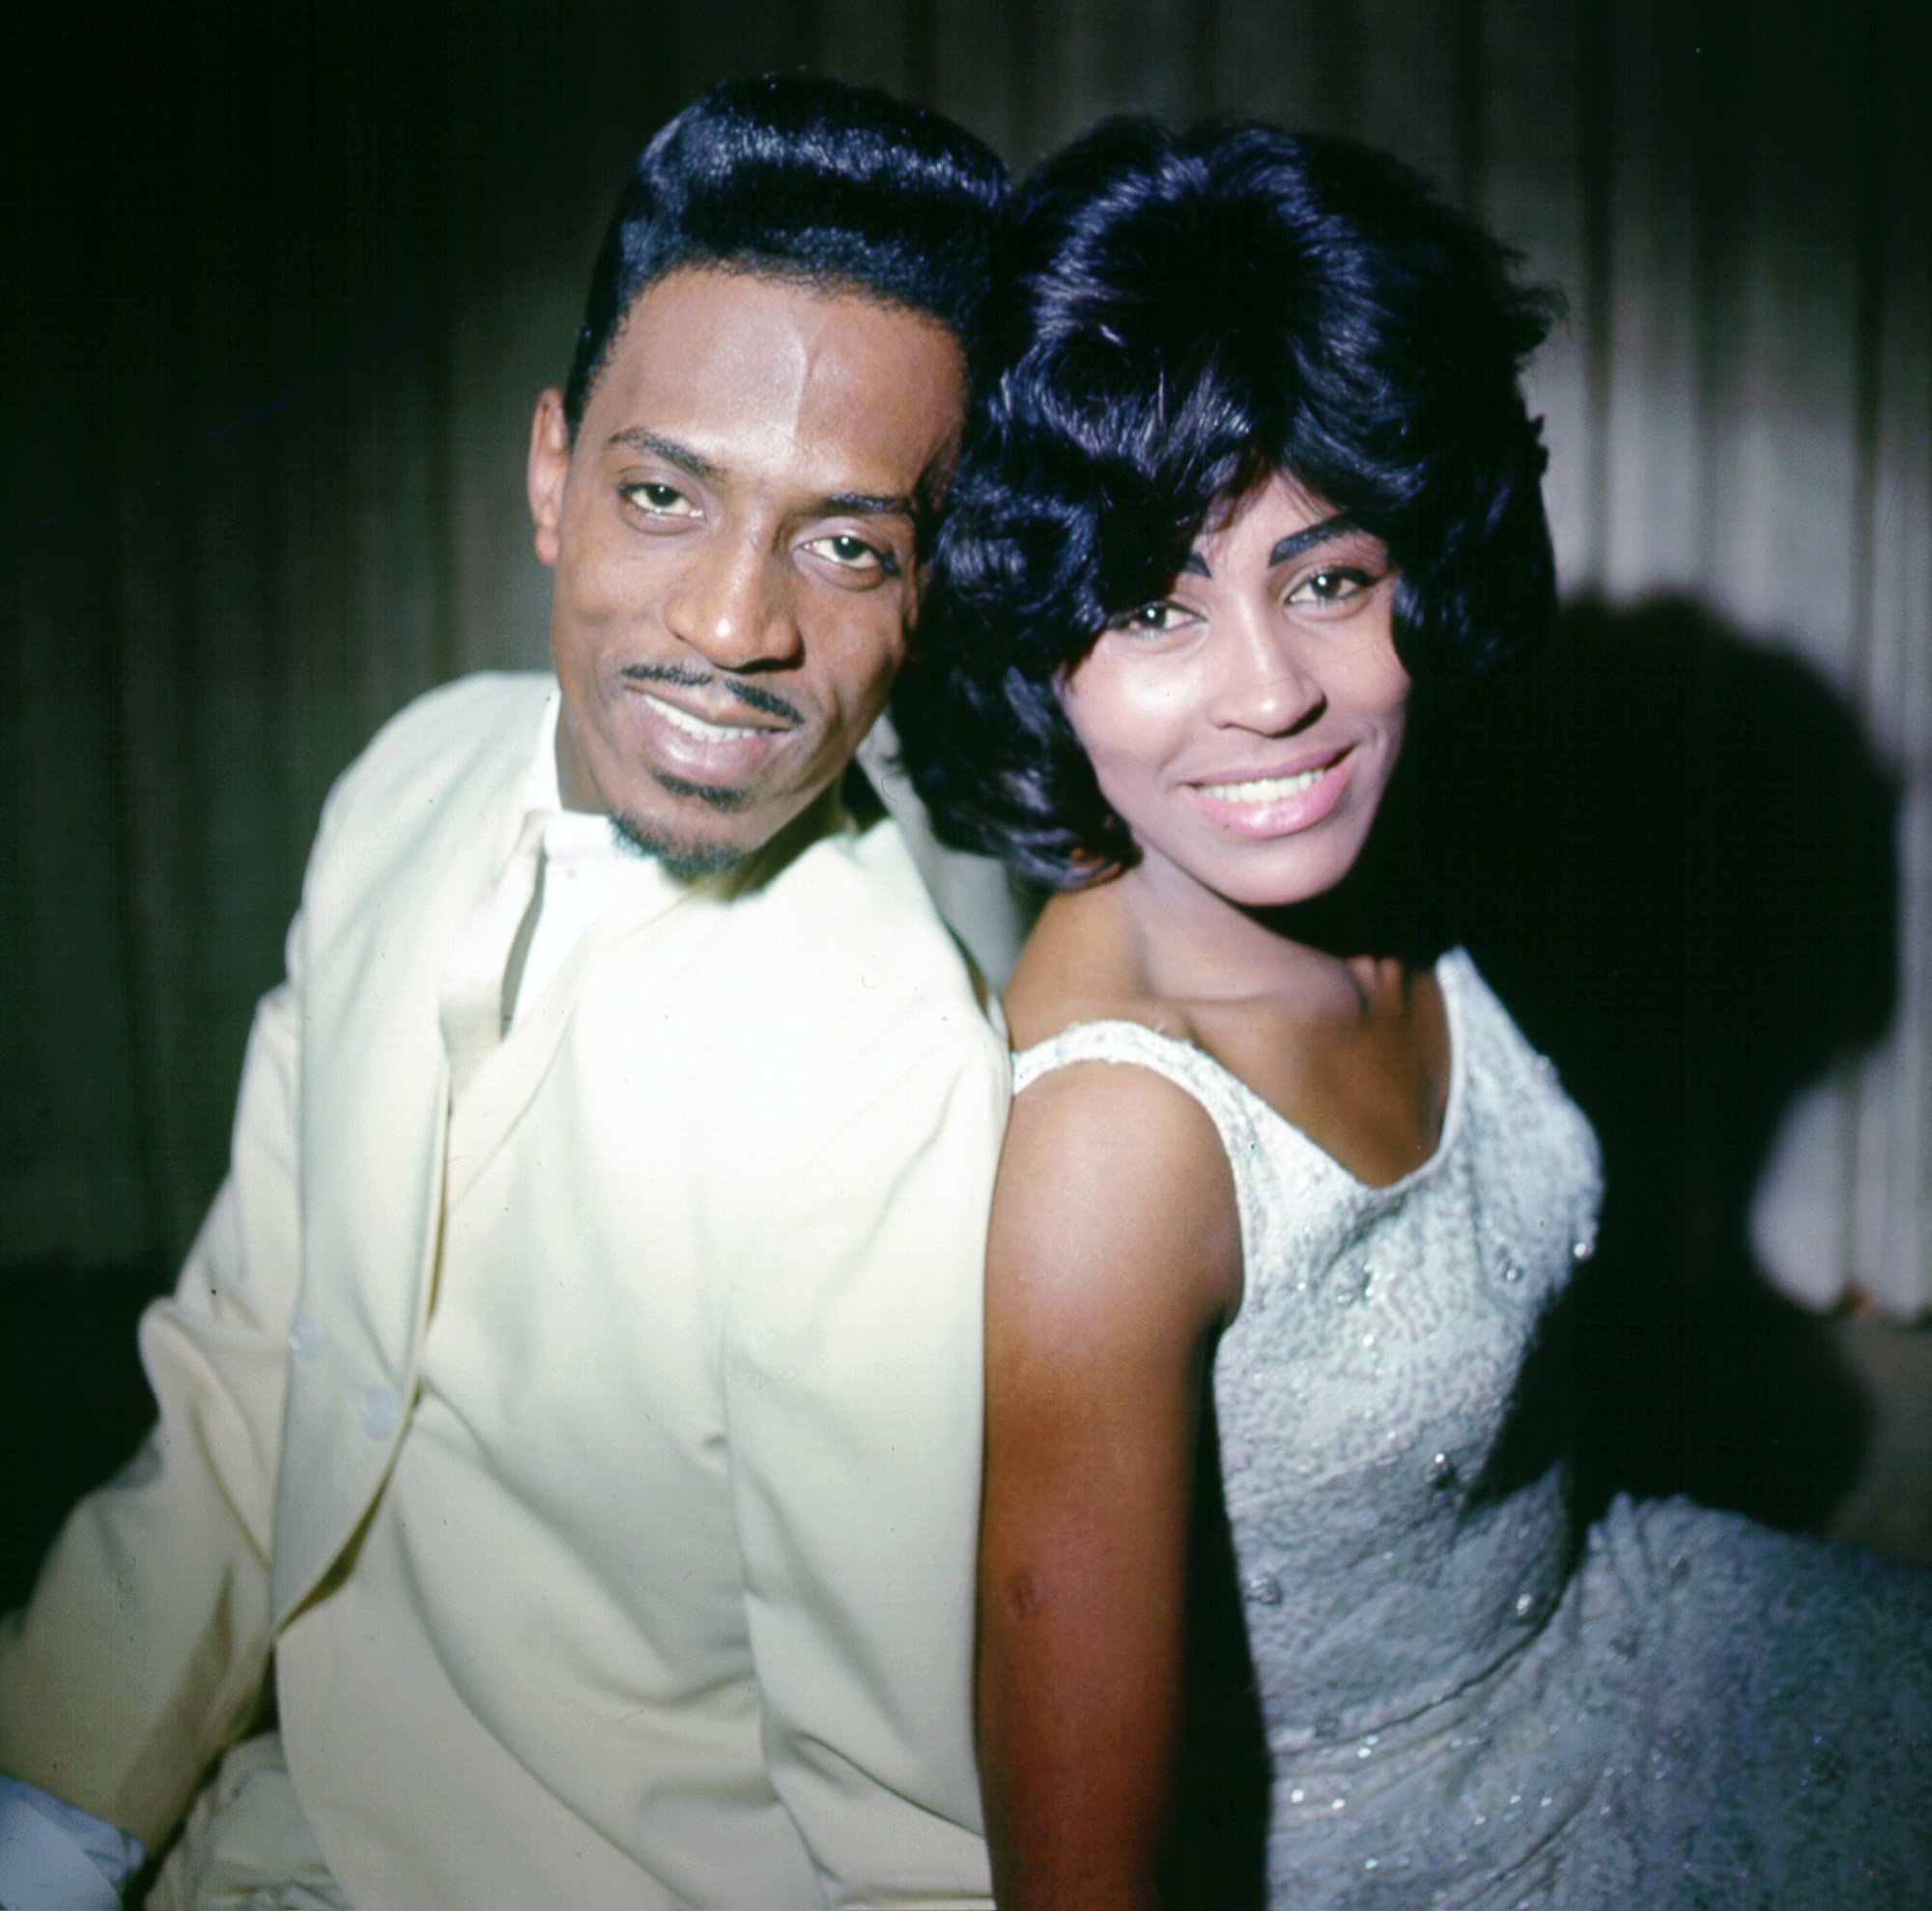 Ike Turner poses side by side with Tina Turner